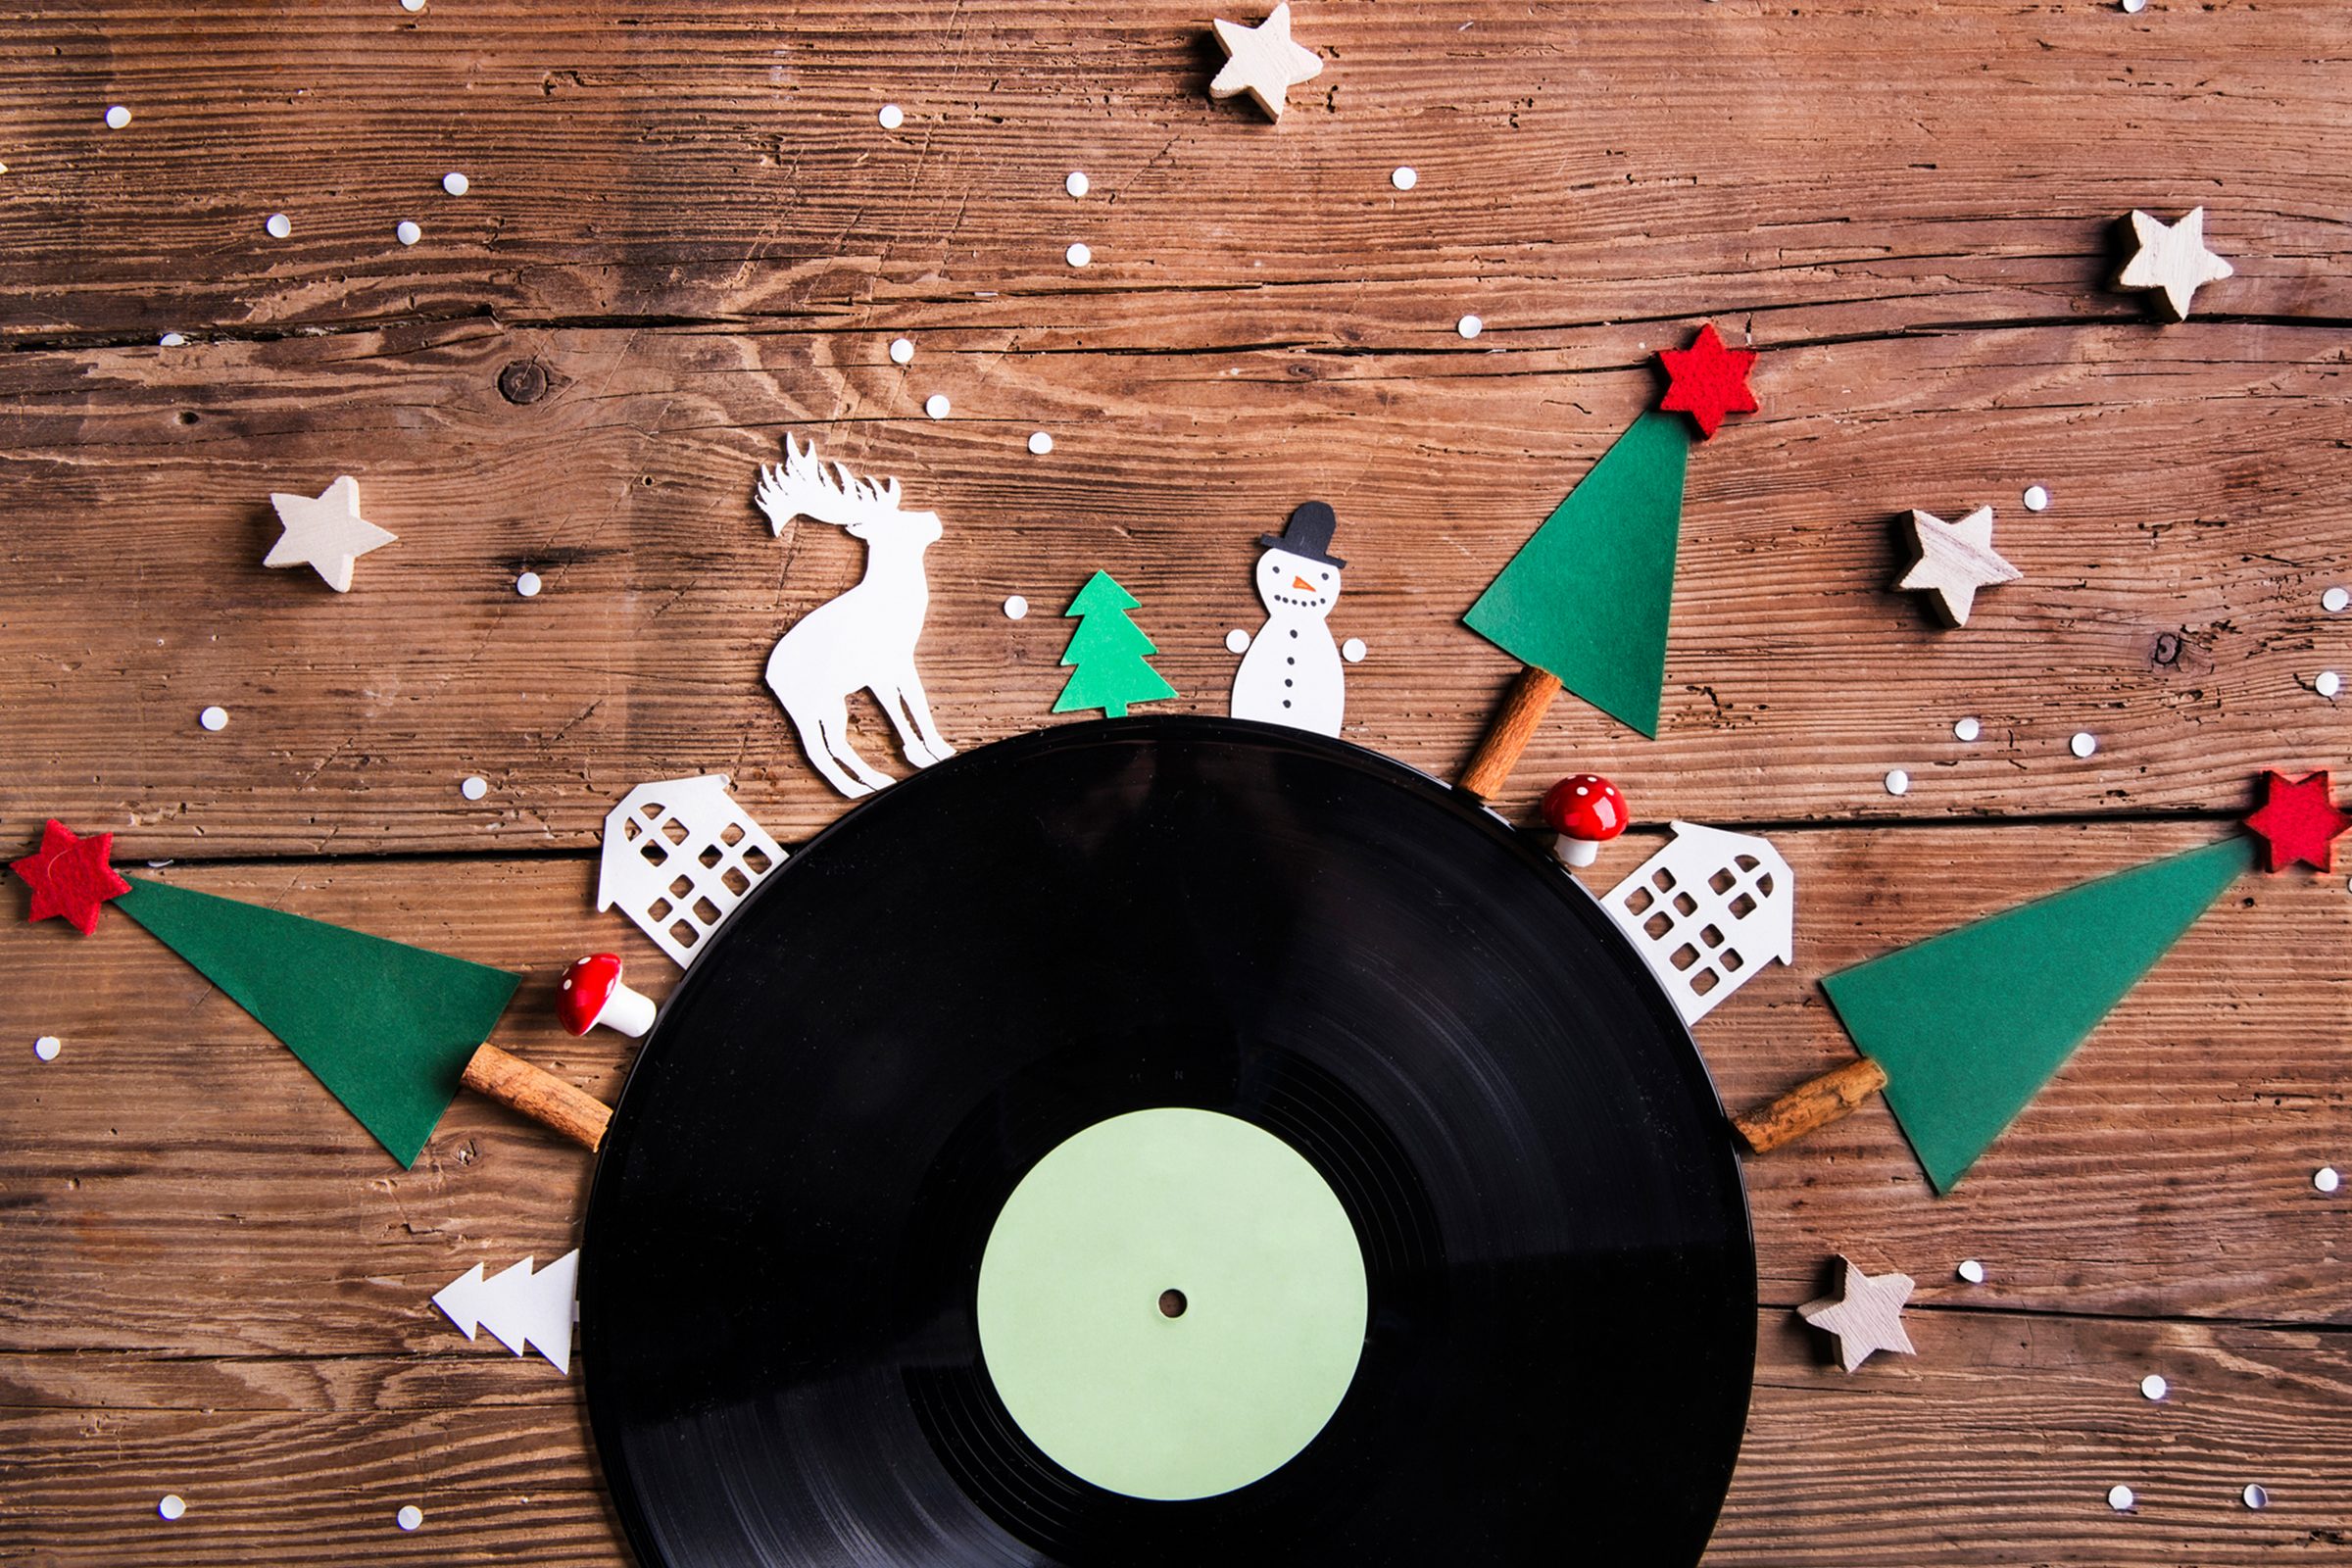 https://www.rd.com/wp-content/uploads/2019/12/70-Best-Christmas-Songs-For-Your-Holiday-Playlist-Opener.jpg